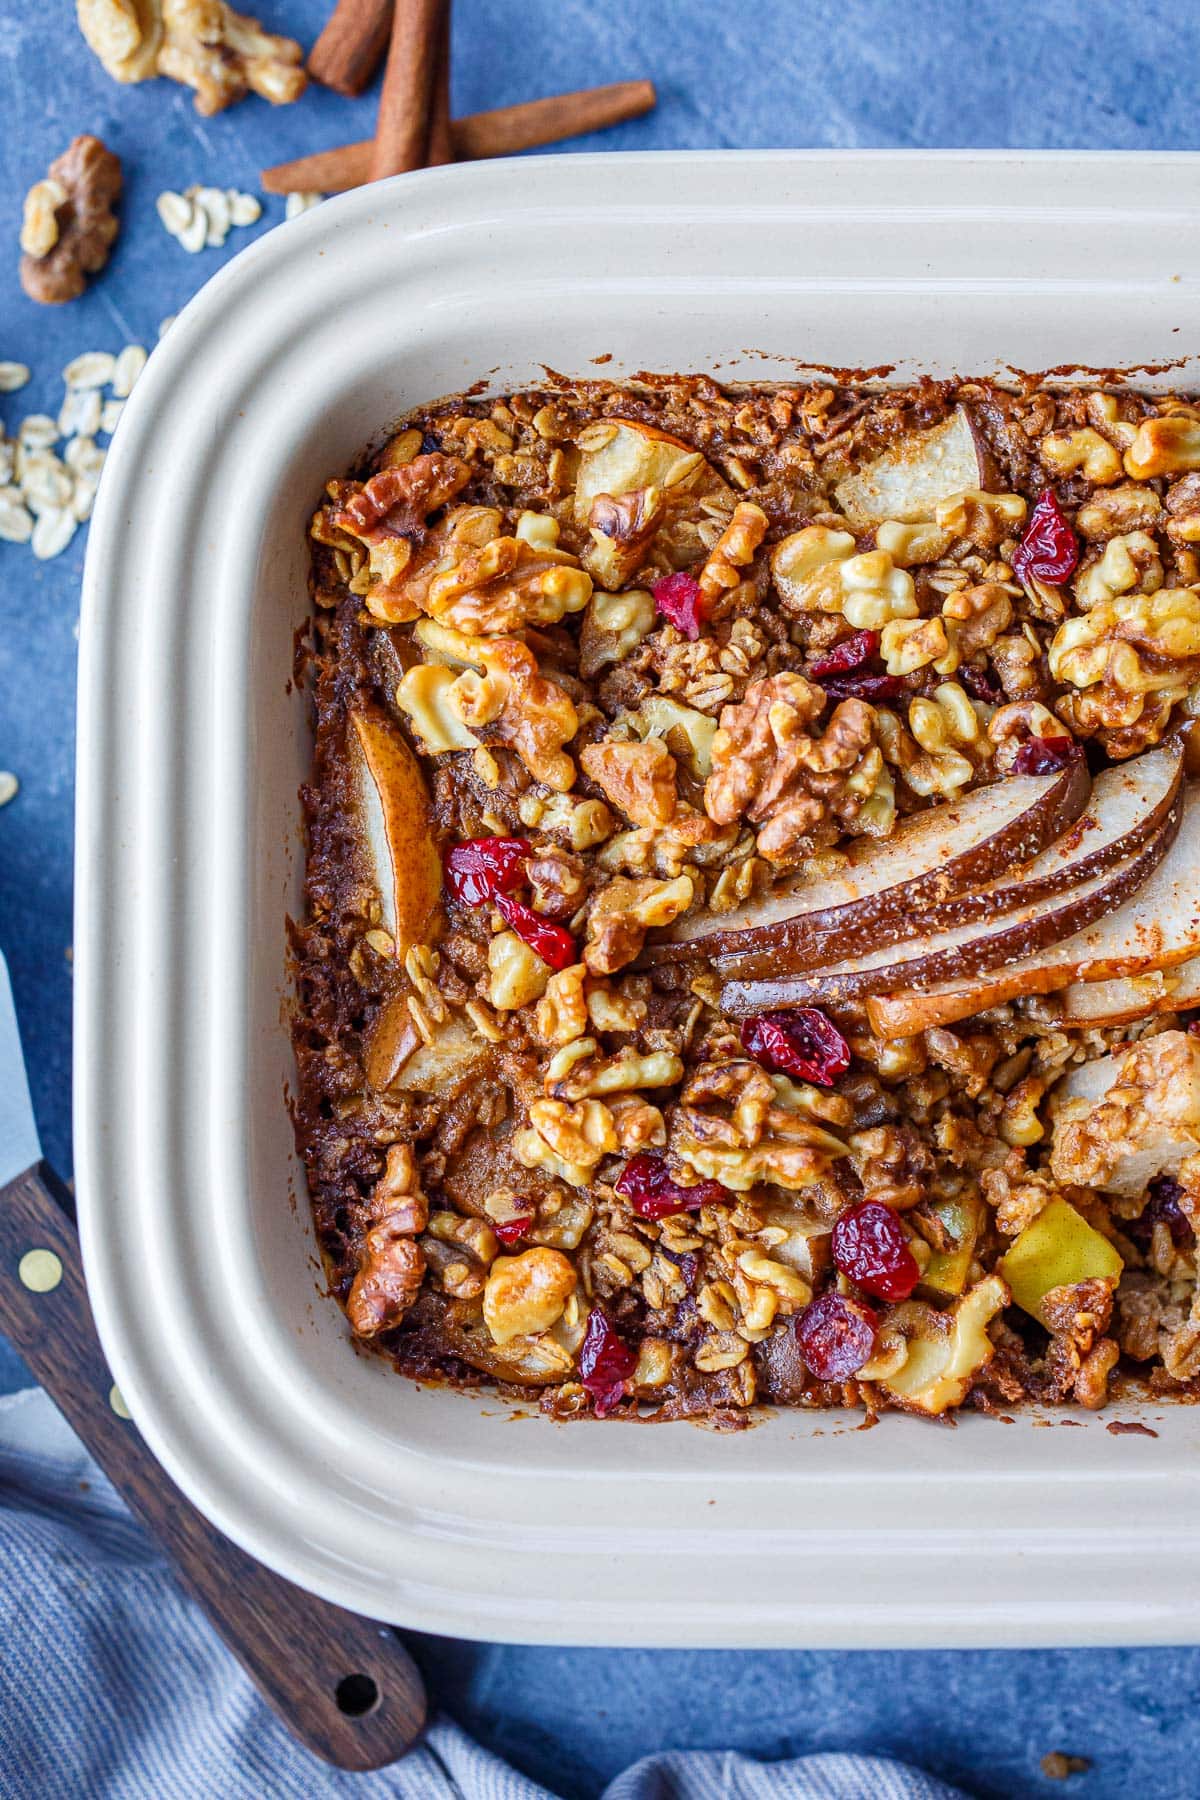 baked oatmeal with slices of pear, dried cranberries, and walnuts